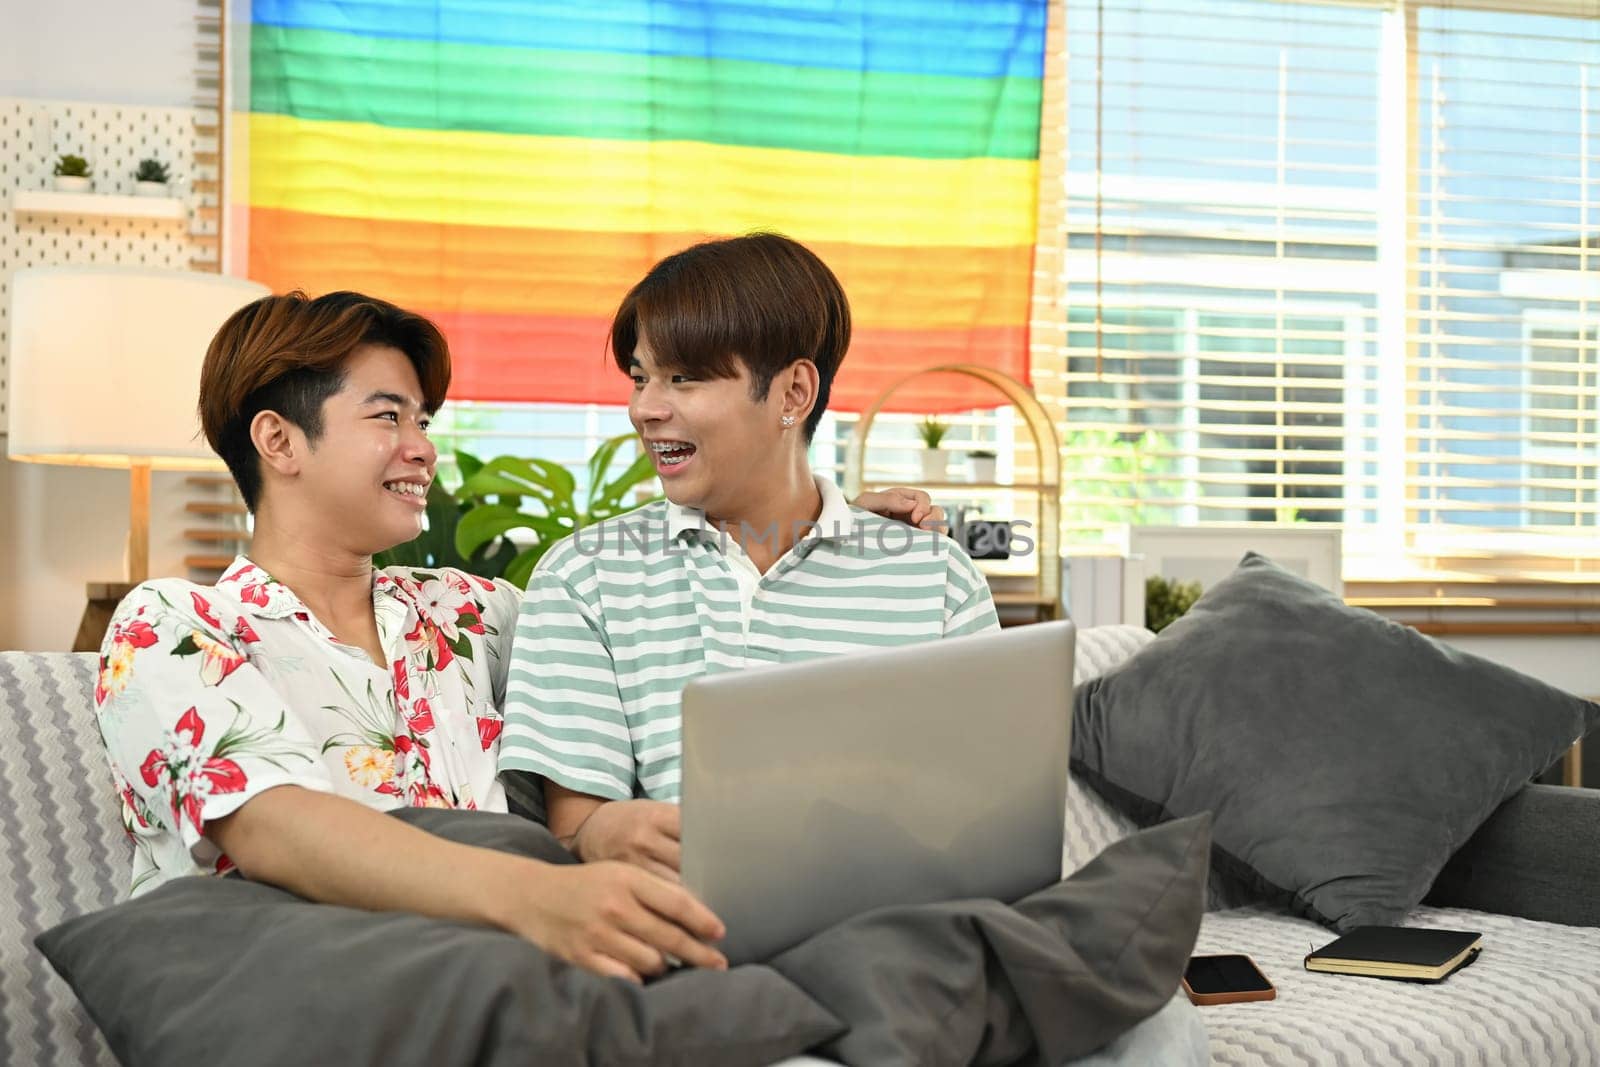 Young gay couple sitting on couch and surfing the net together at home. LGBTQ people lifestyle concept.